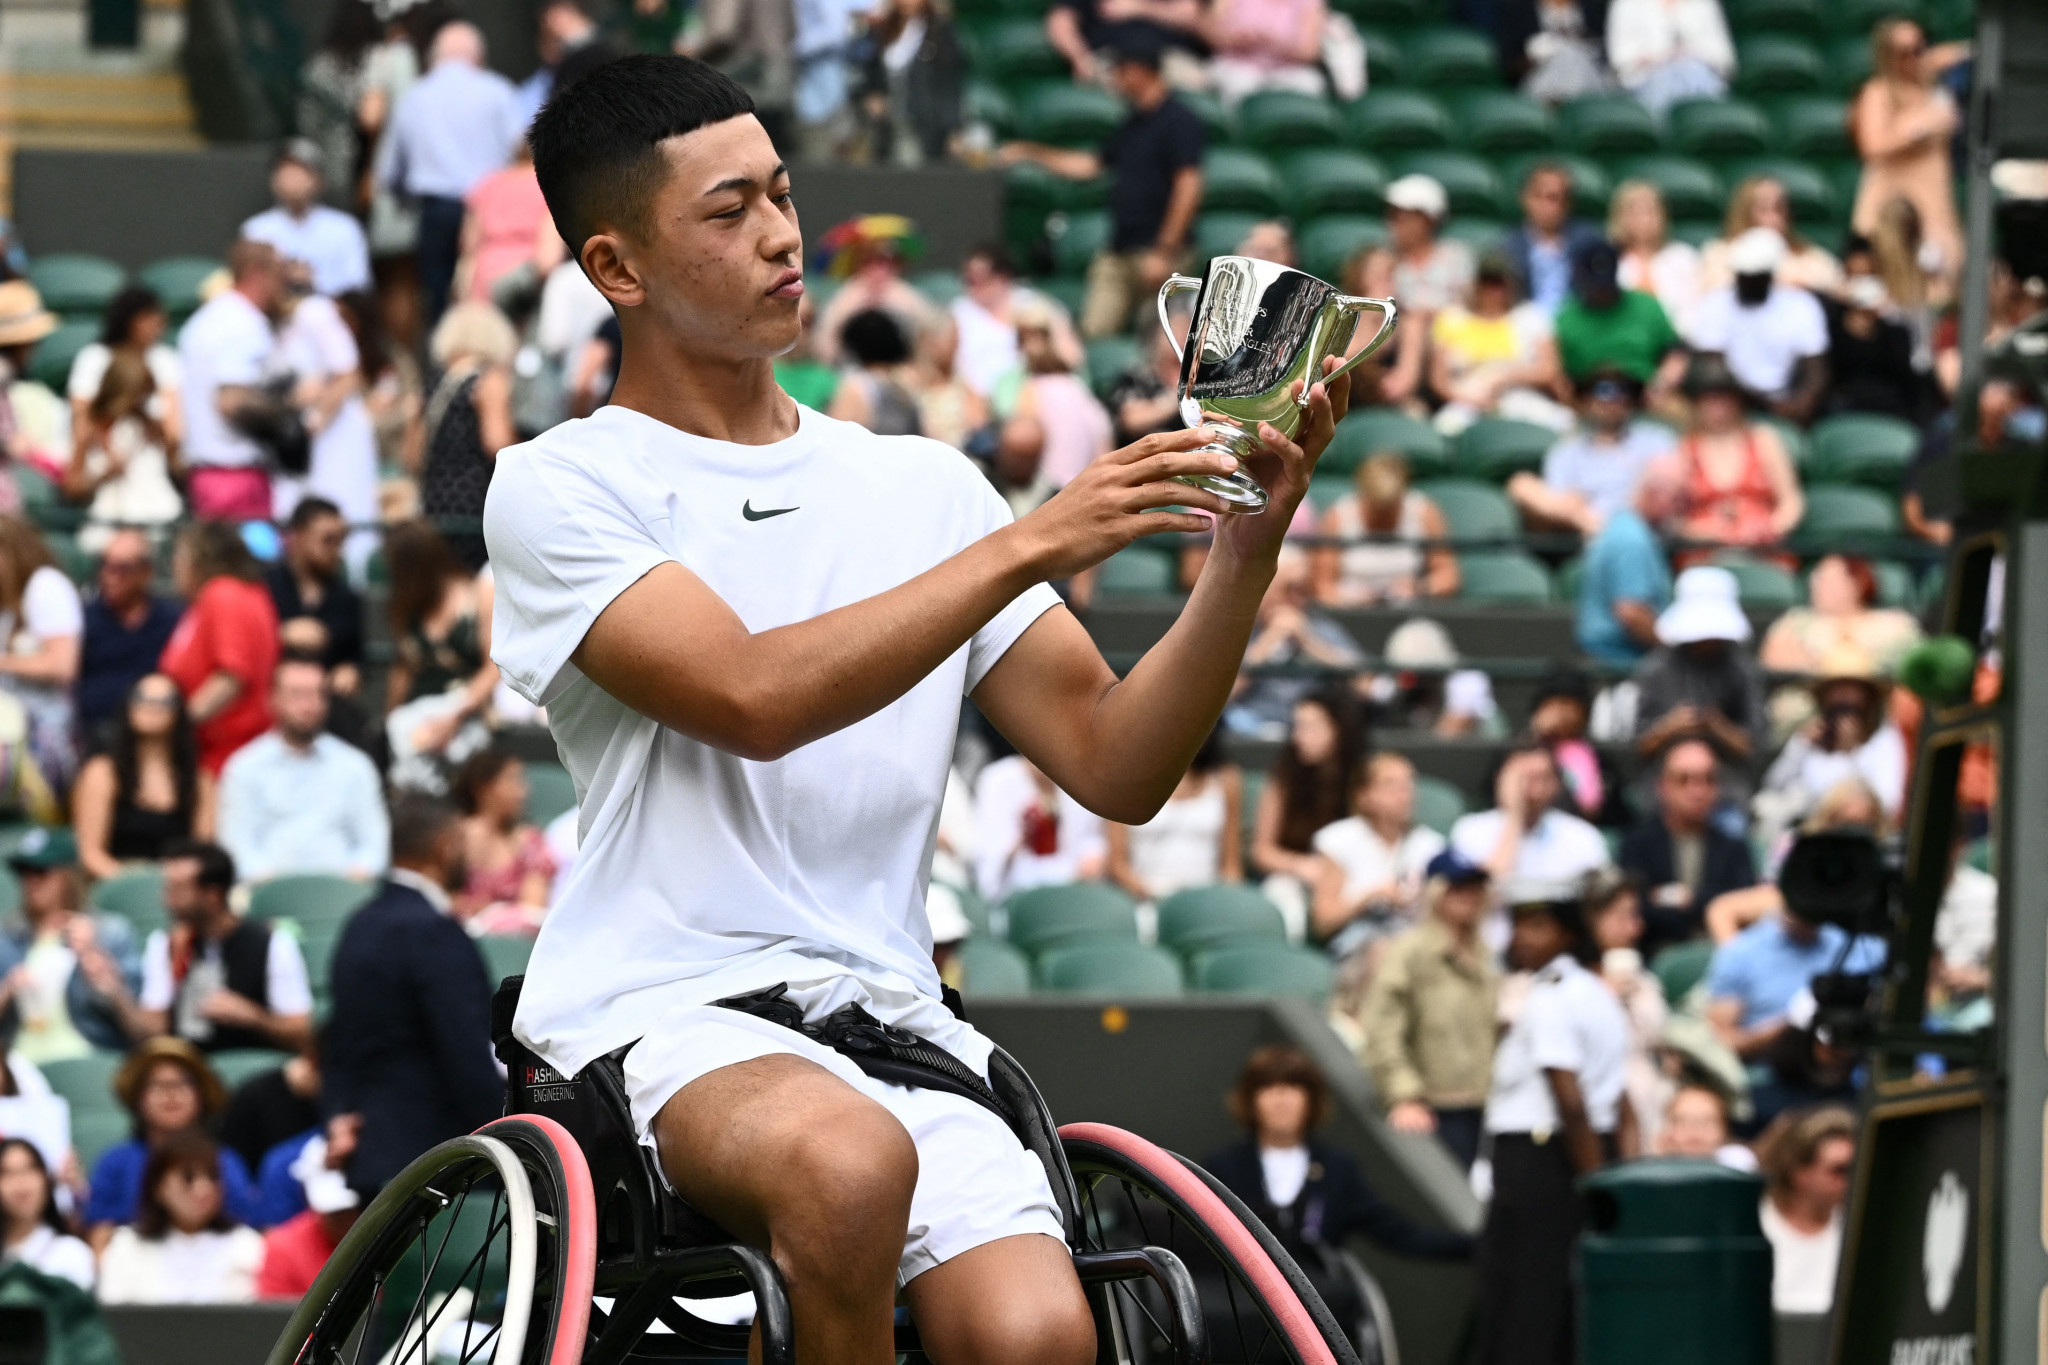 Tokito Oda of Japan won the men's wheelchair singles title at the age of 17 ©Getty Images